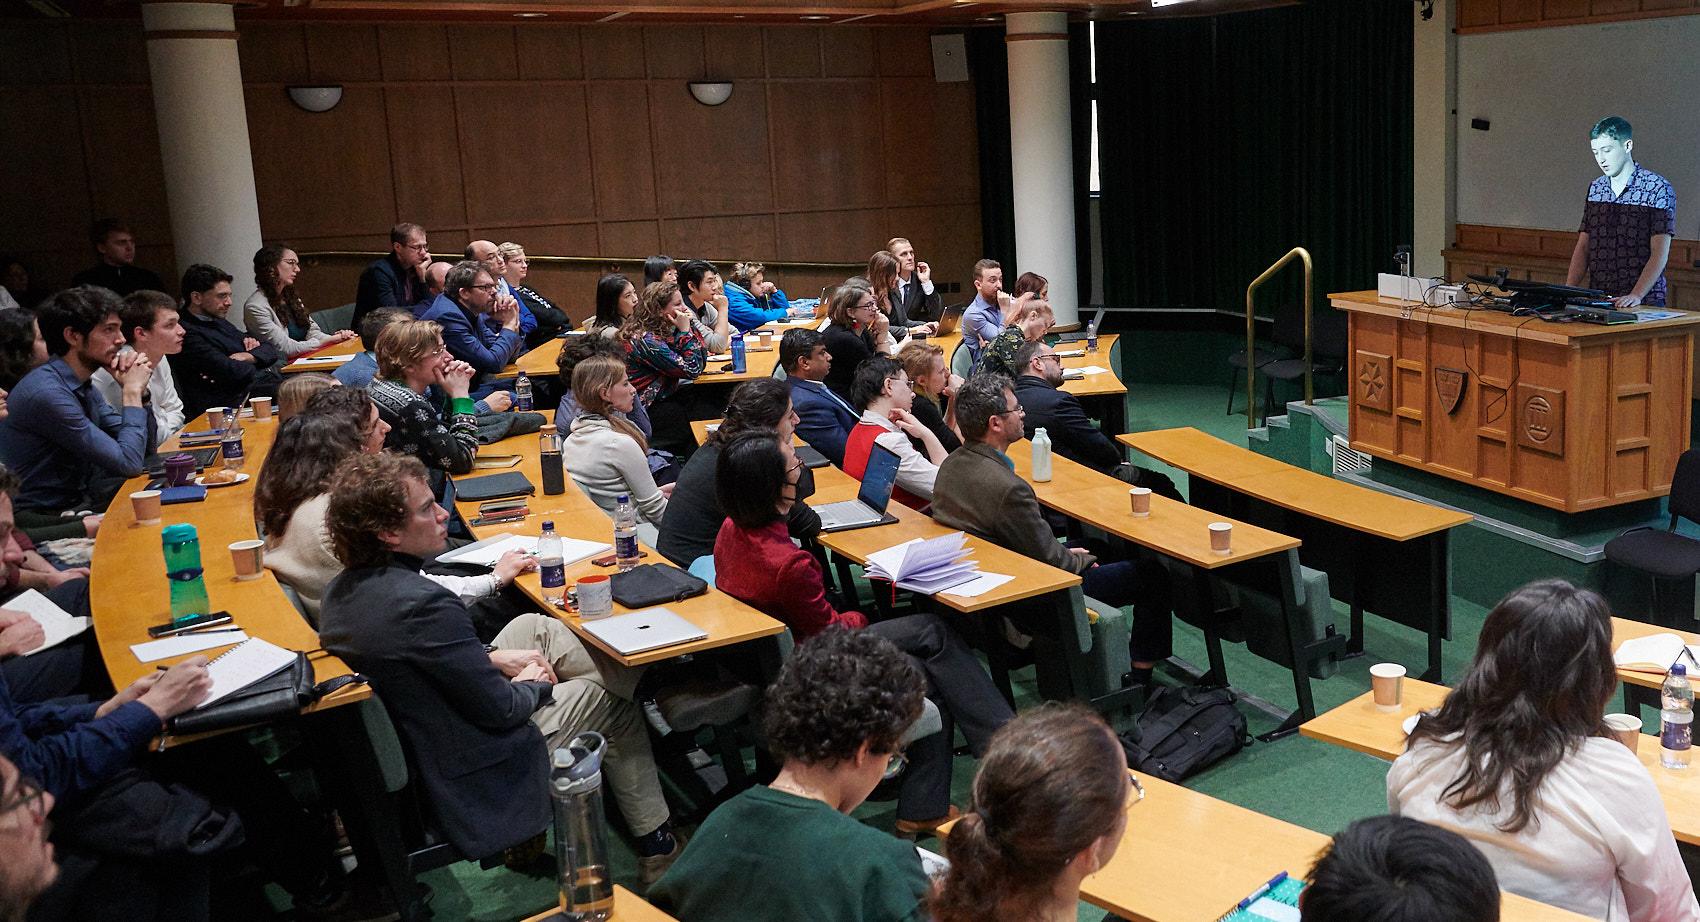 A photo of the lecture theatre audience at Winter Science Day 2023.